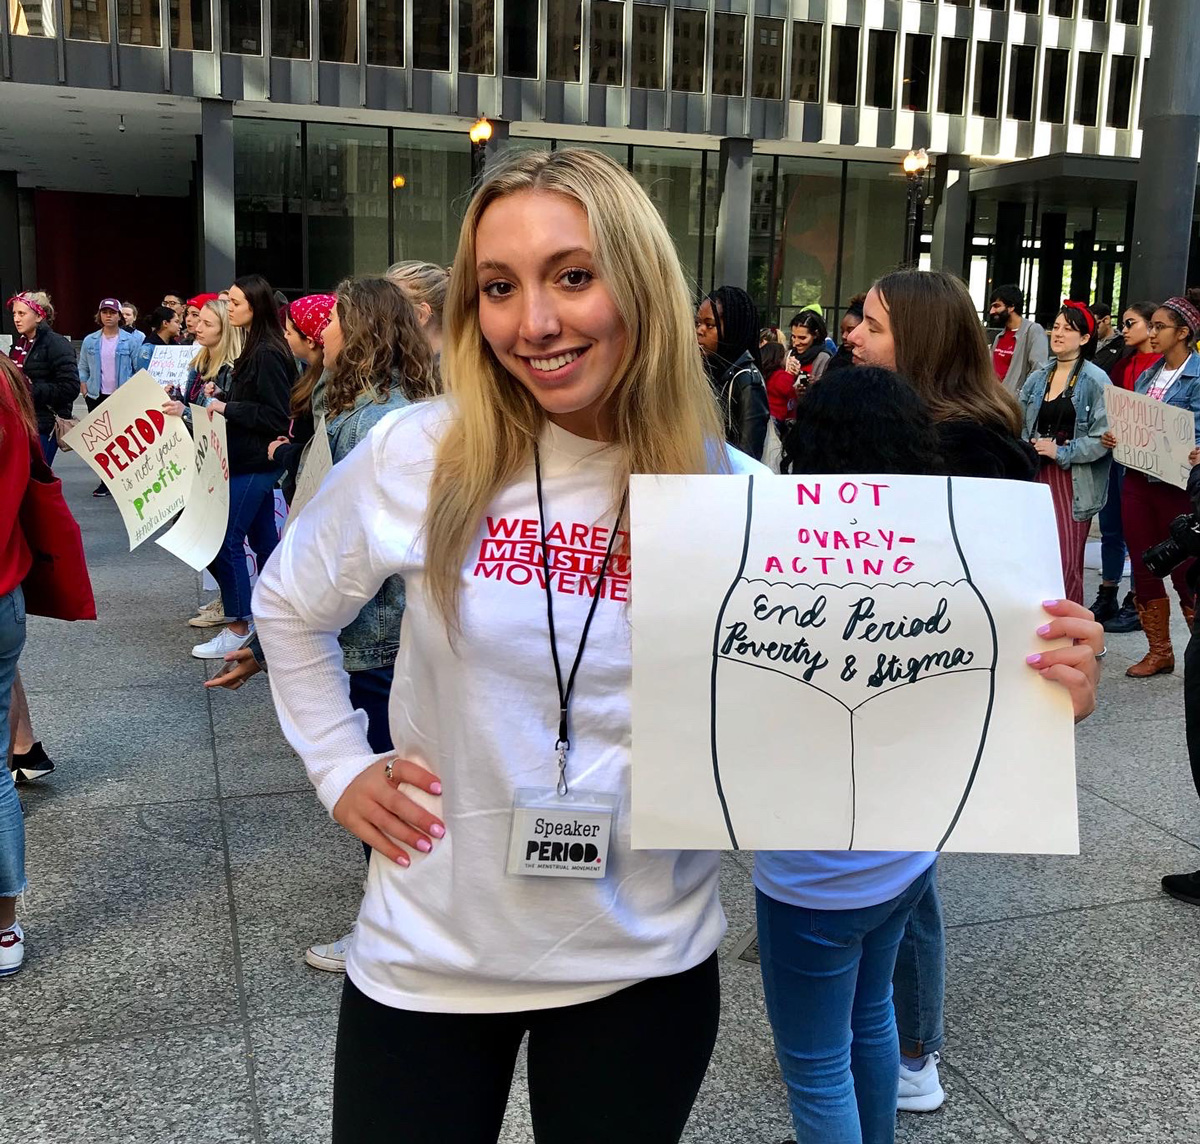 Sophie standing outside at a rally holding a sign that says "Not ovary acting end period poverty and stigma".